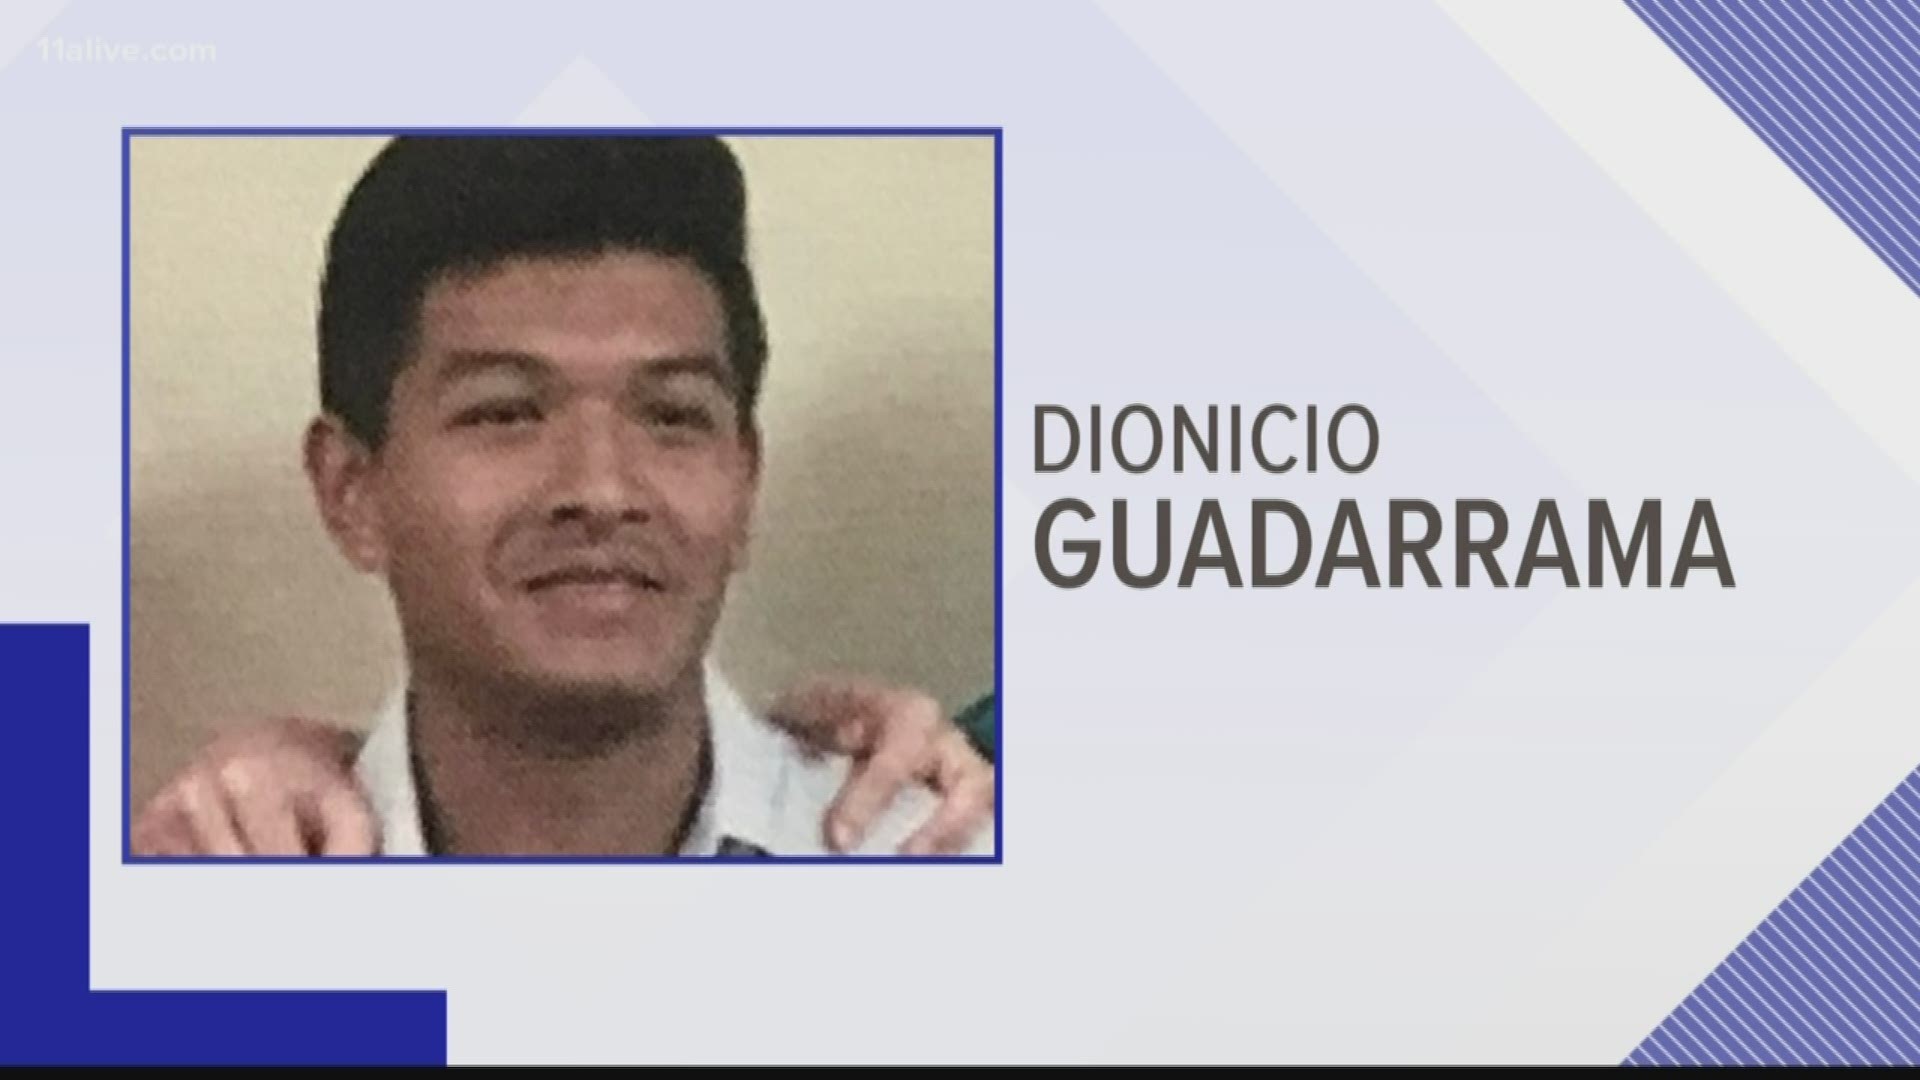 Sex Videos 19 Years Raping Videos - Dionicio Guadarrama wanted for rape, sexual battery charges | 11alive.com